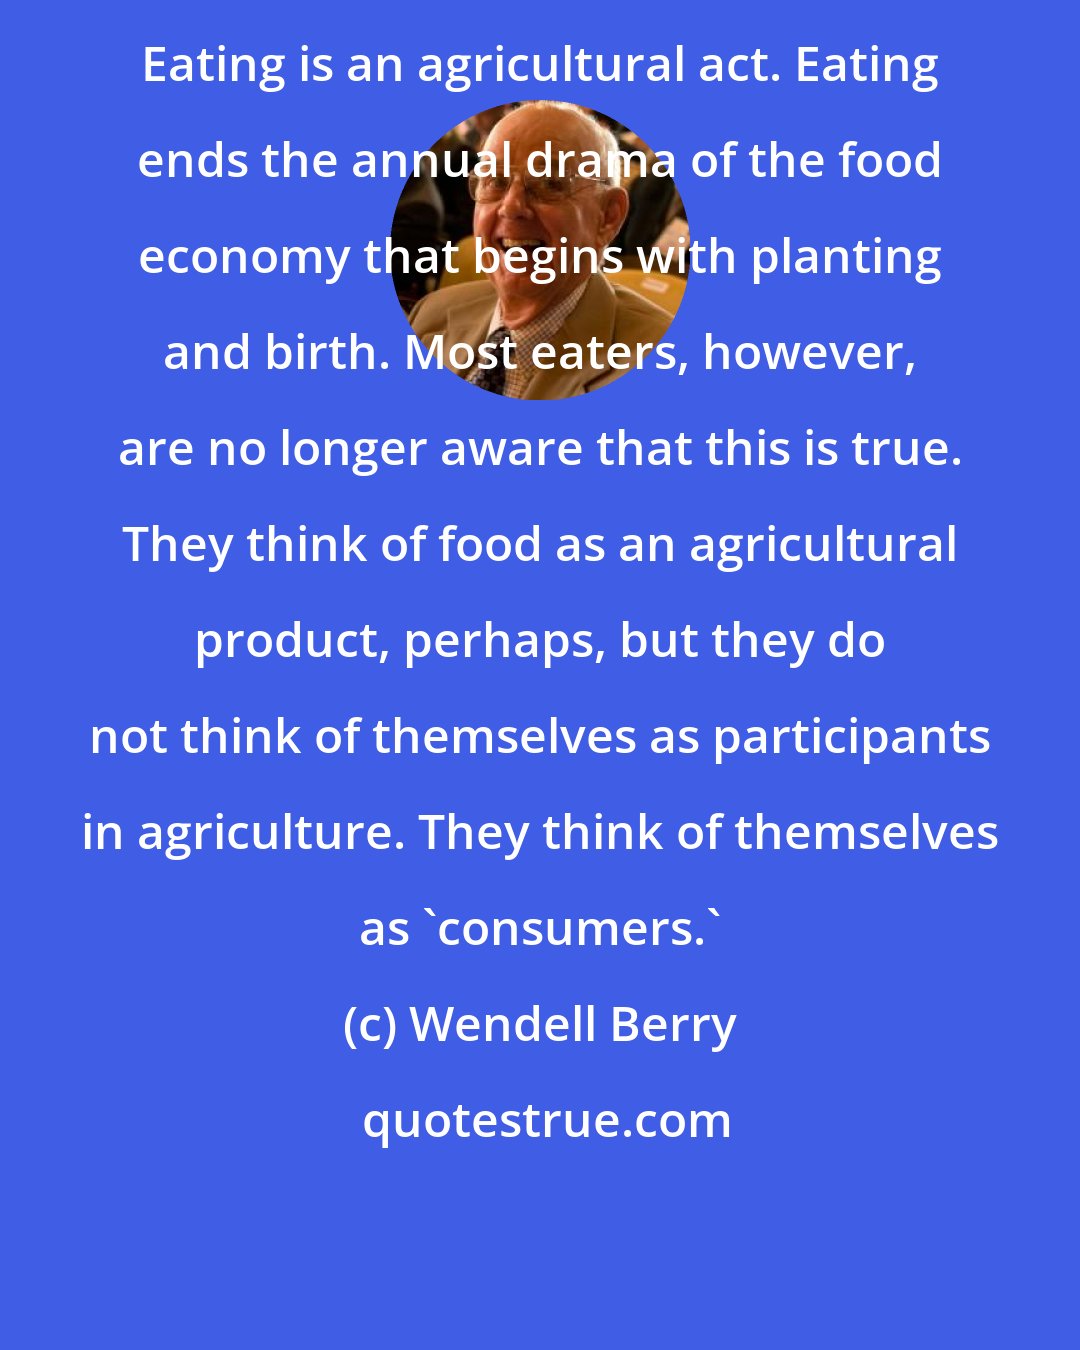 Wendell Berry: Eating is an agricultural act. Eating ends the annual drama of the food economy that begins with planting and birth. Most eaters, however, are no longer aware that this is true. They think of food as an agricultural product, perhaps, but they do not think of themselves as participants in agriculture. They think of themselves as 'consumers.'